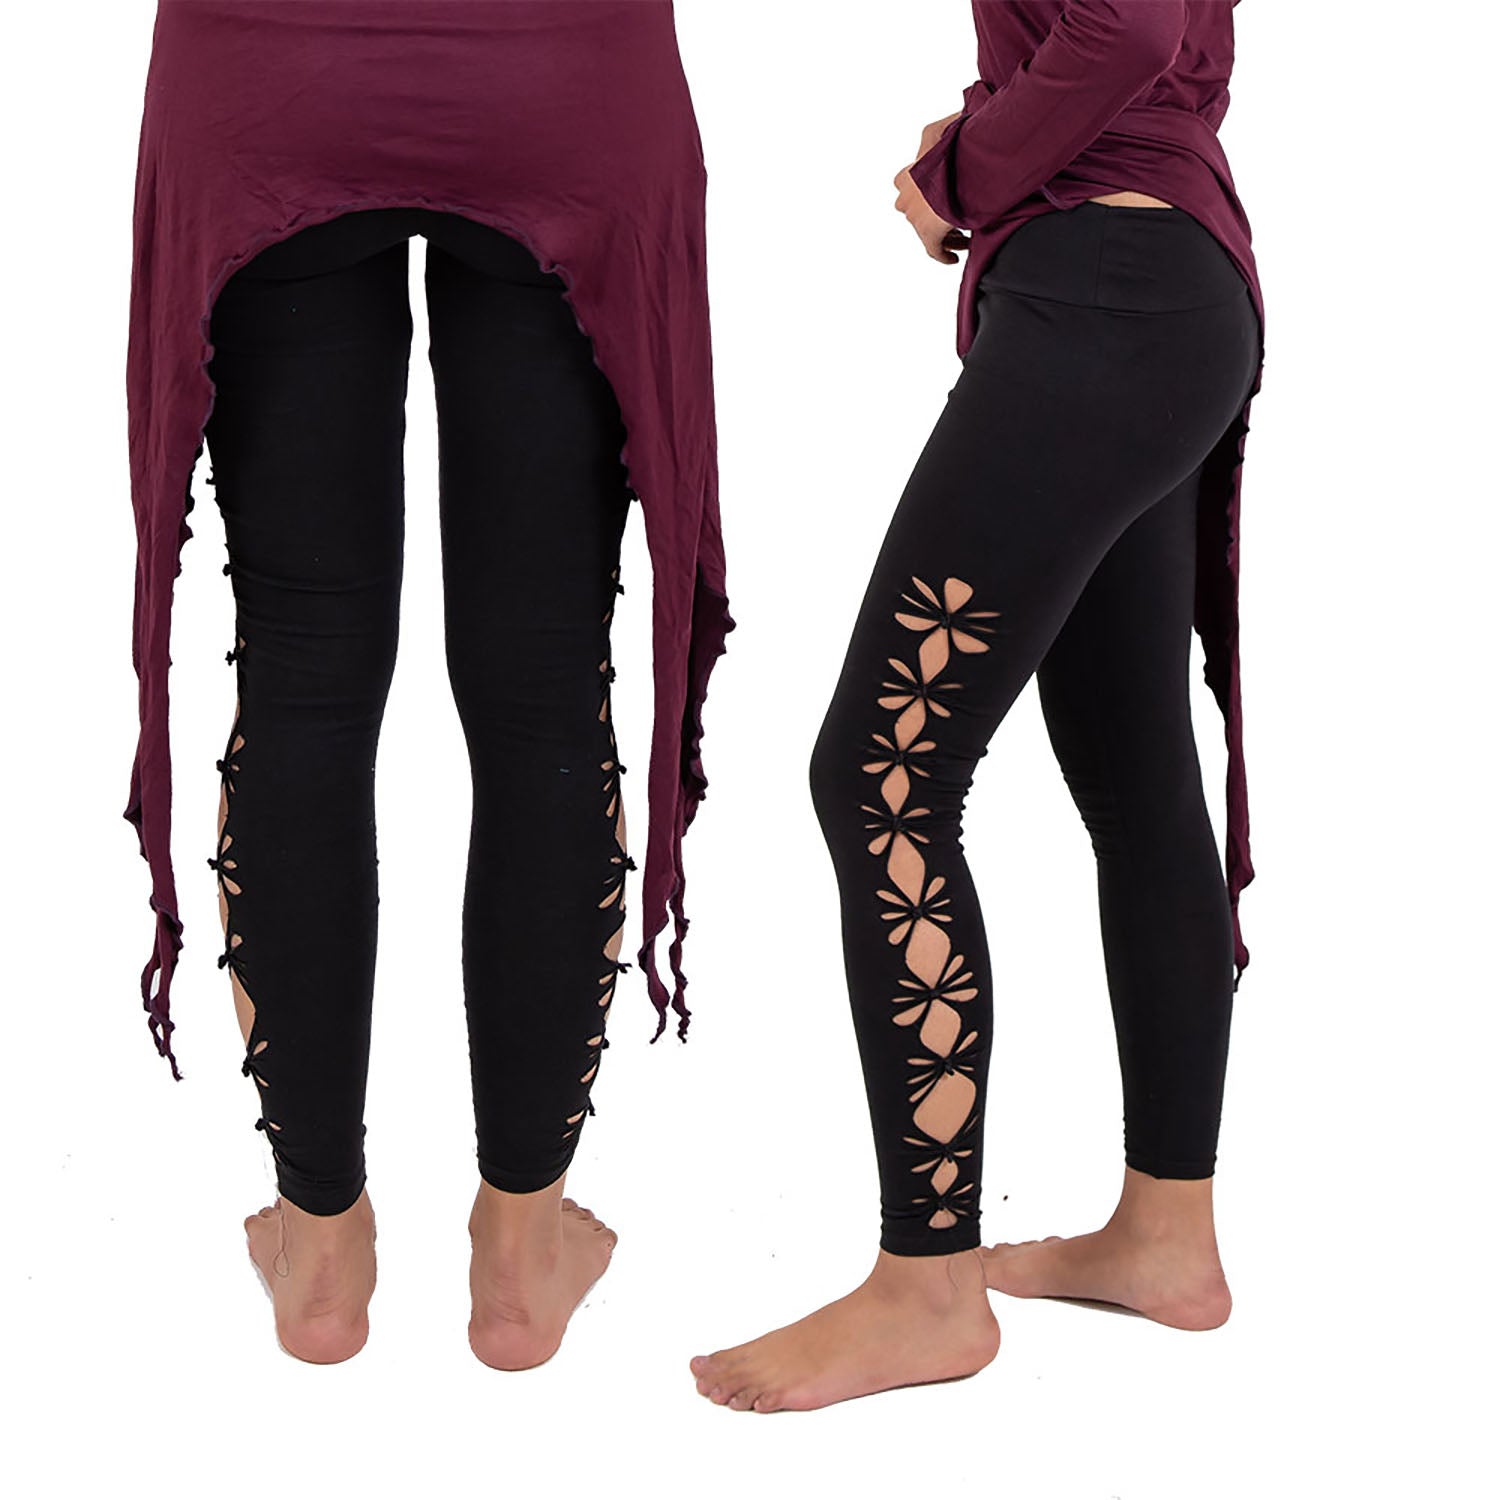 Buy Cut Out Festival Leggings With Braided Lace and Crochet Pattern,  Festival Outfit Online in India - Etsy